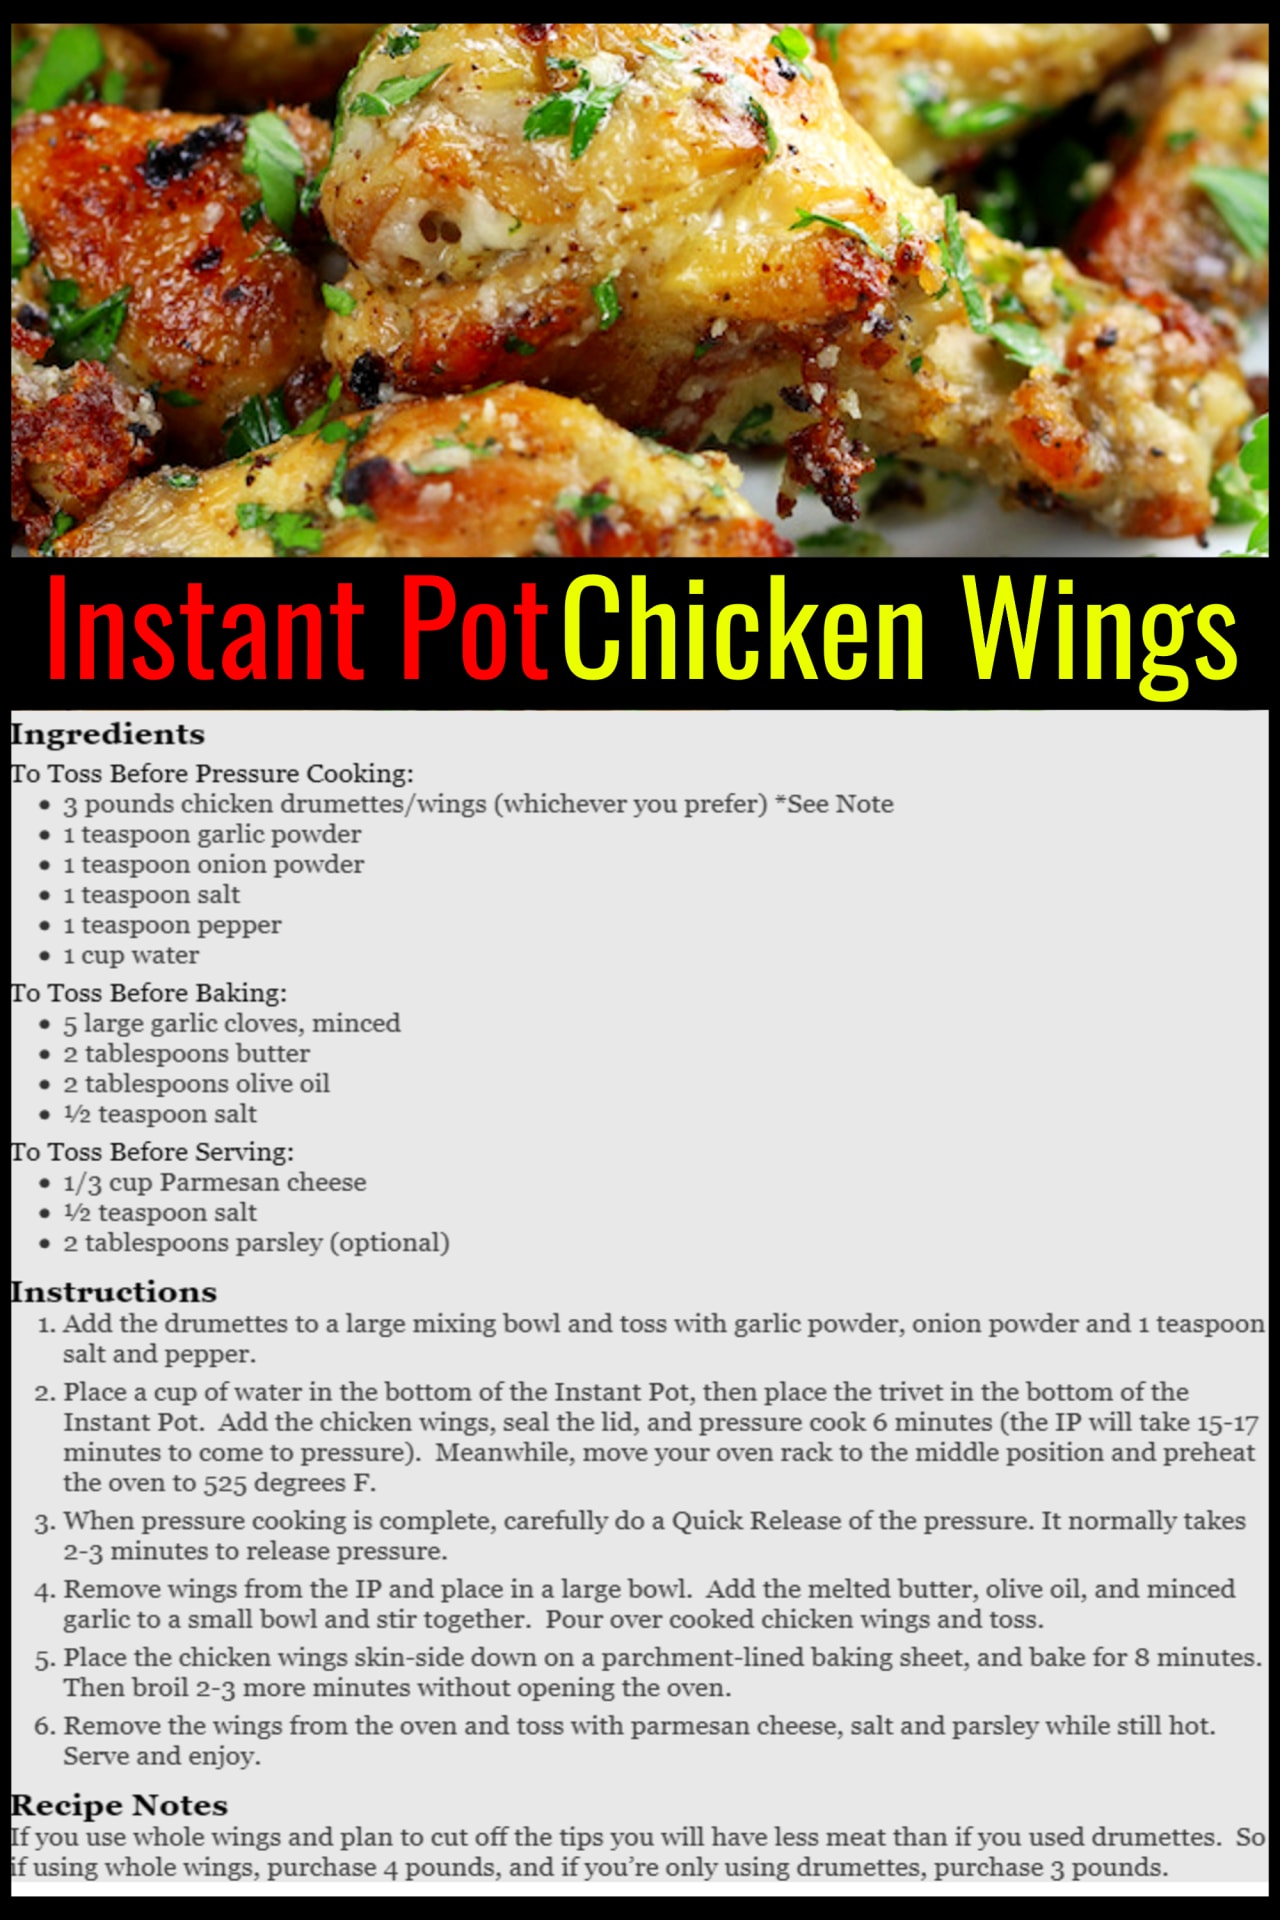 Instant Pot Chicken Recipes For Easy Weeknight Dinners - simple Instant Pot parmesan chicken wings recipe for easy meals or easy party appetizers